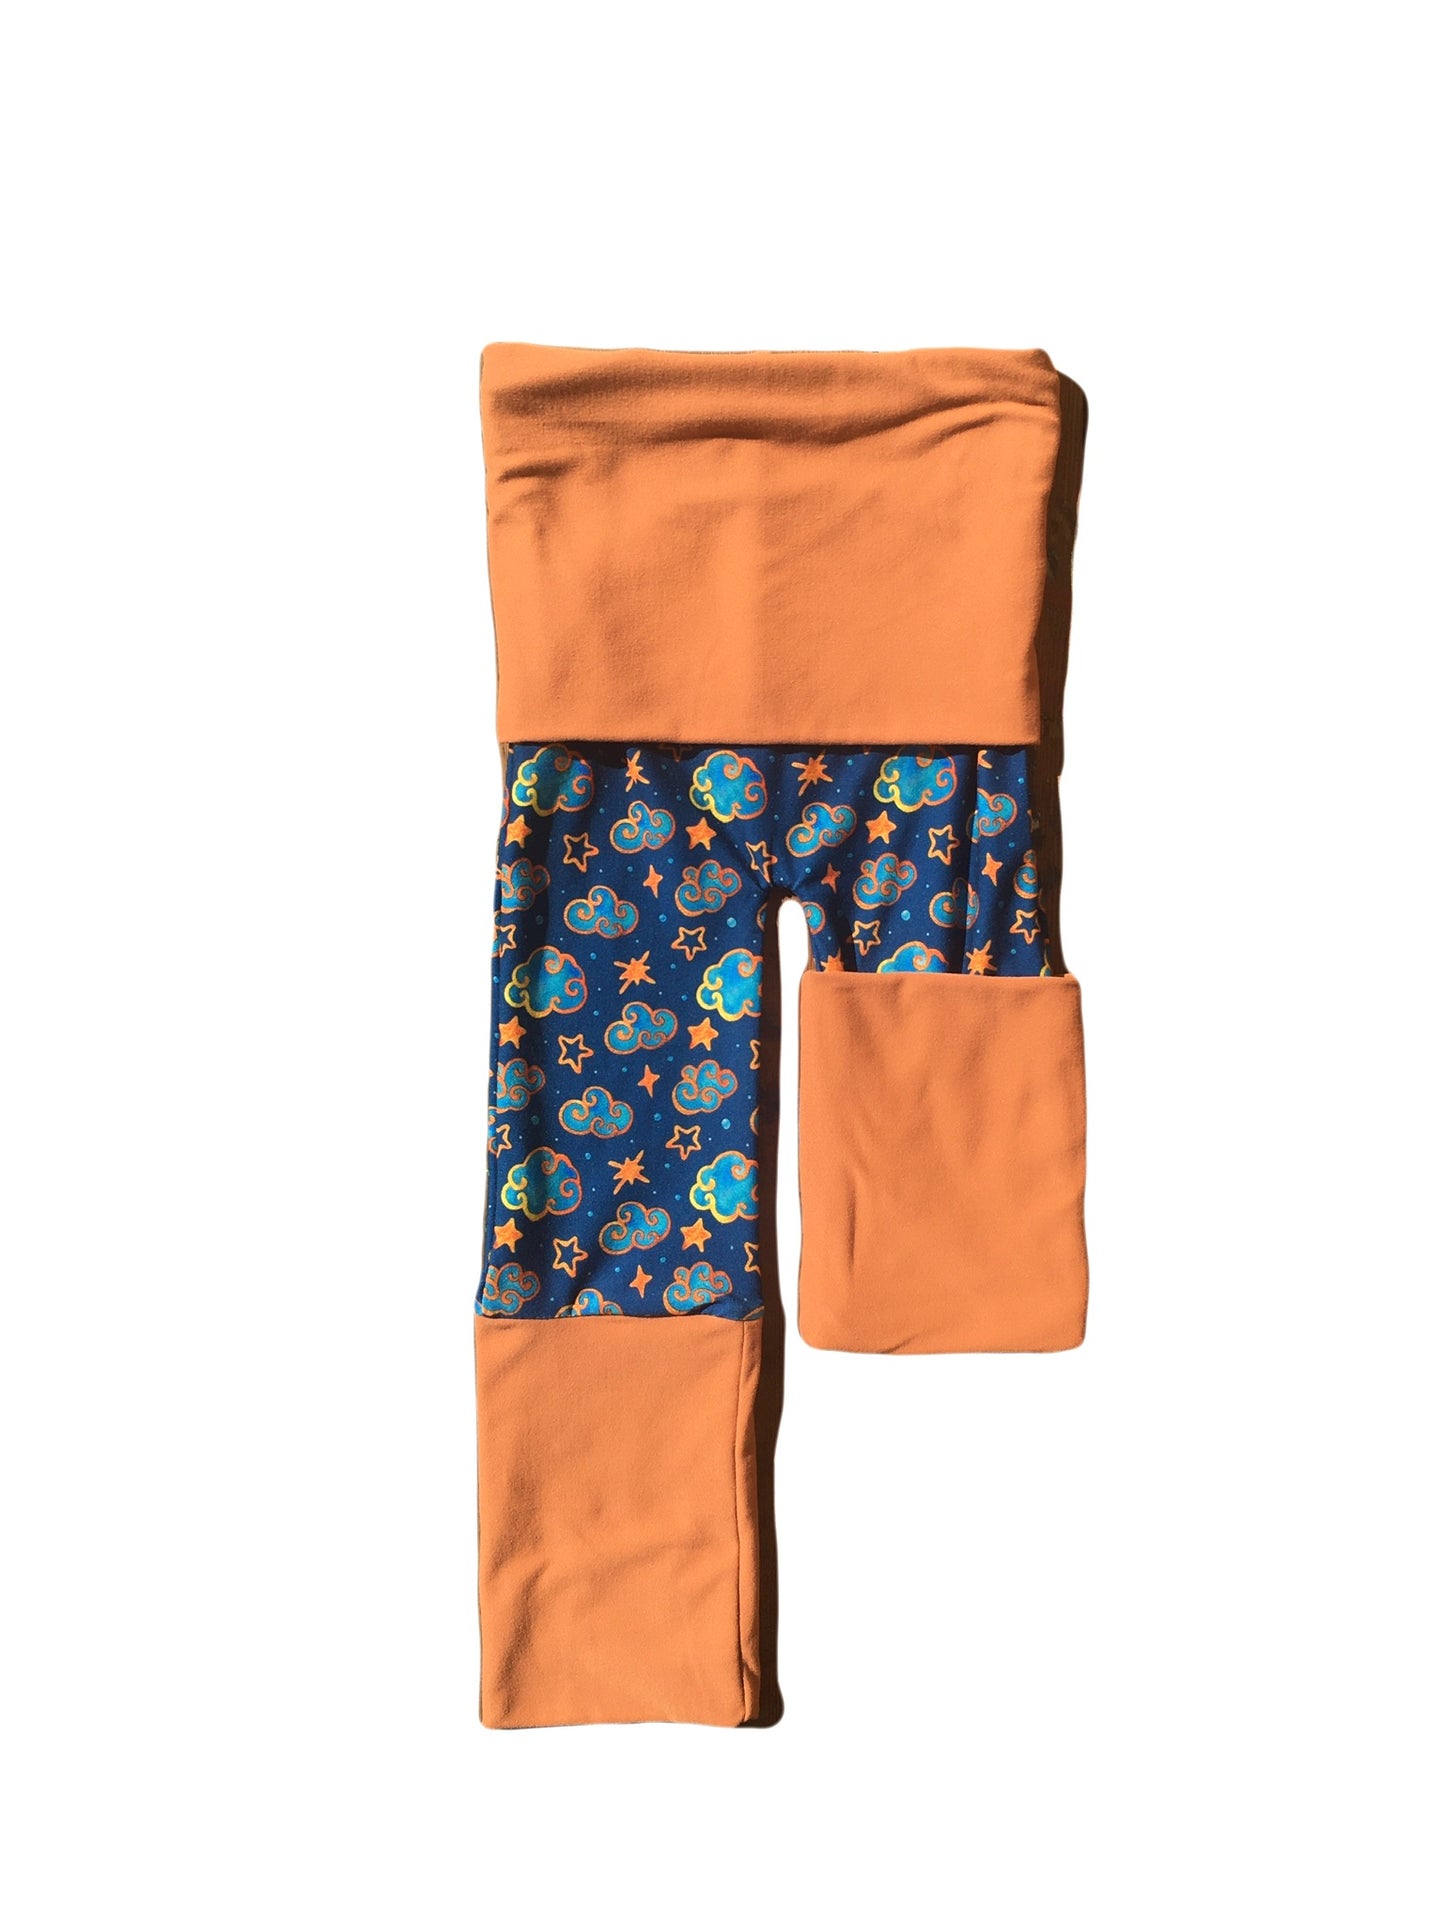 Adjustable Pants - Clouds with Peach